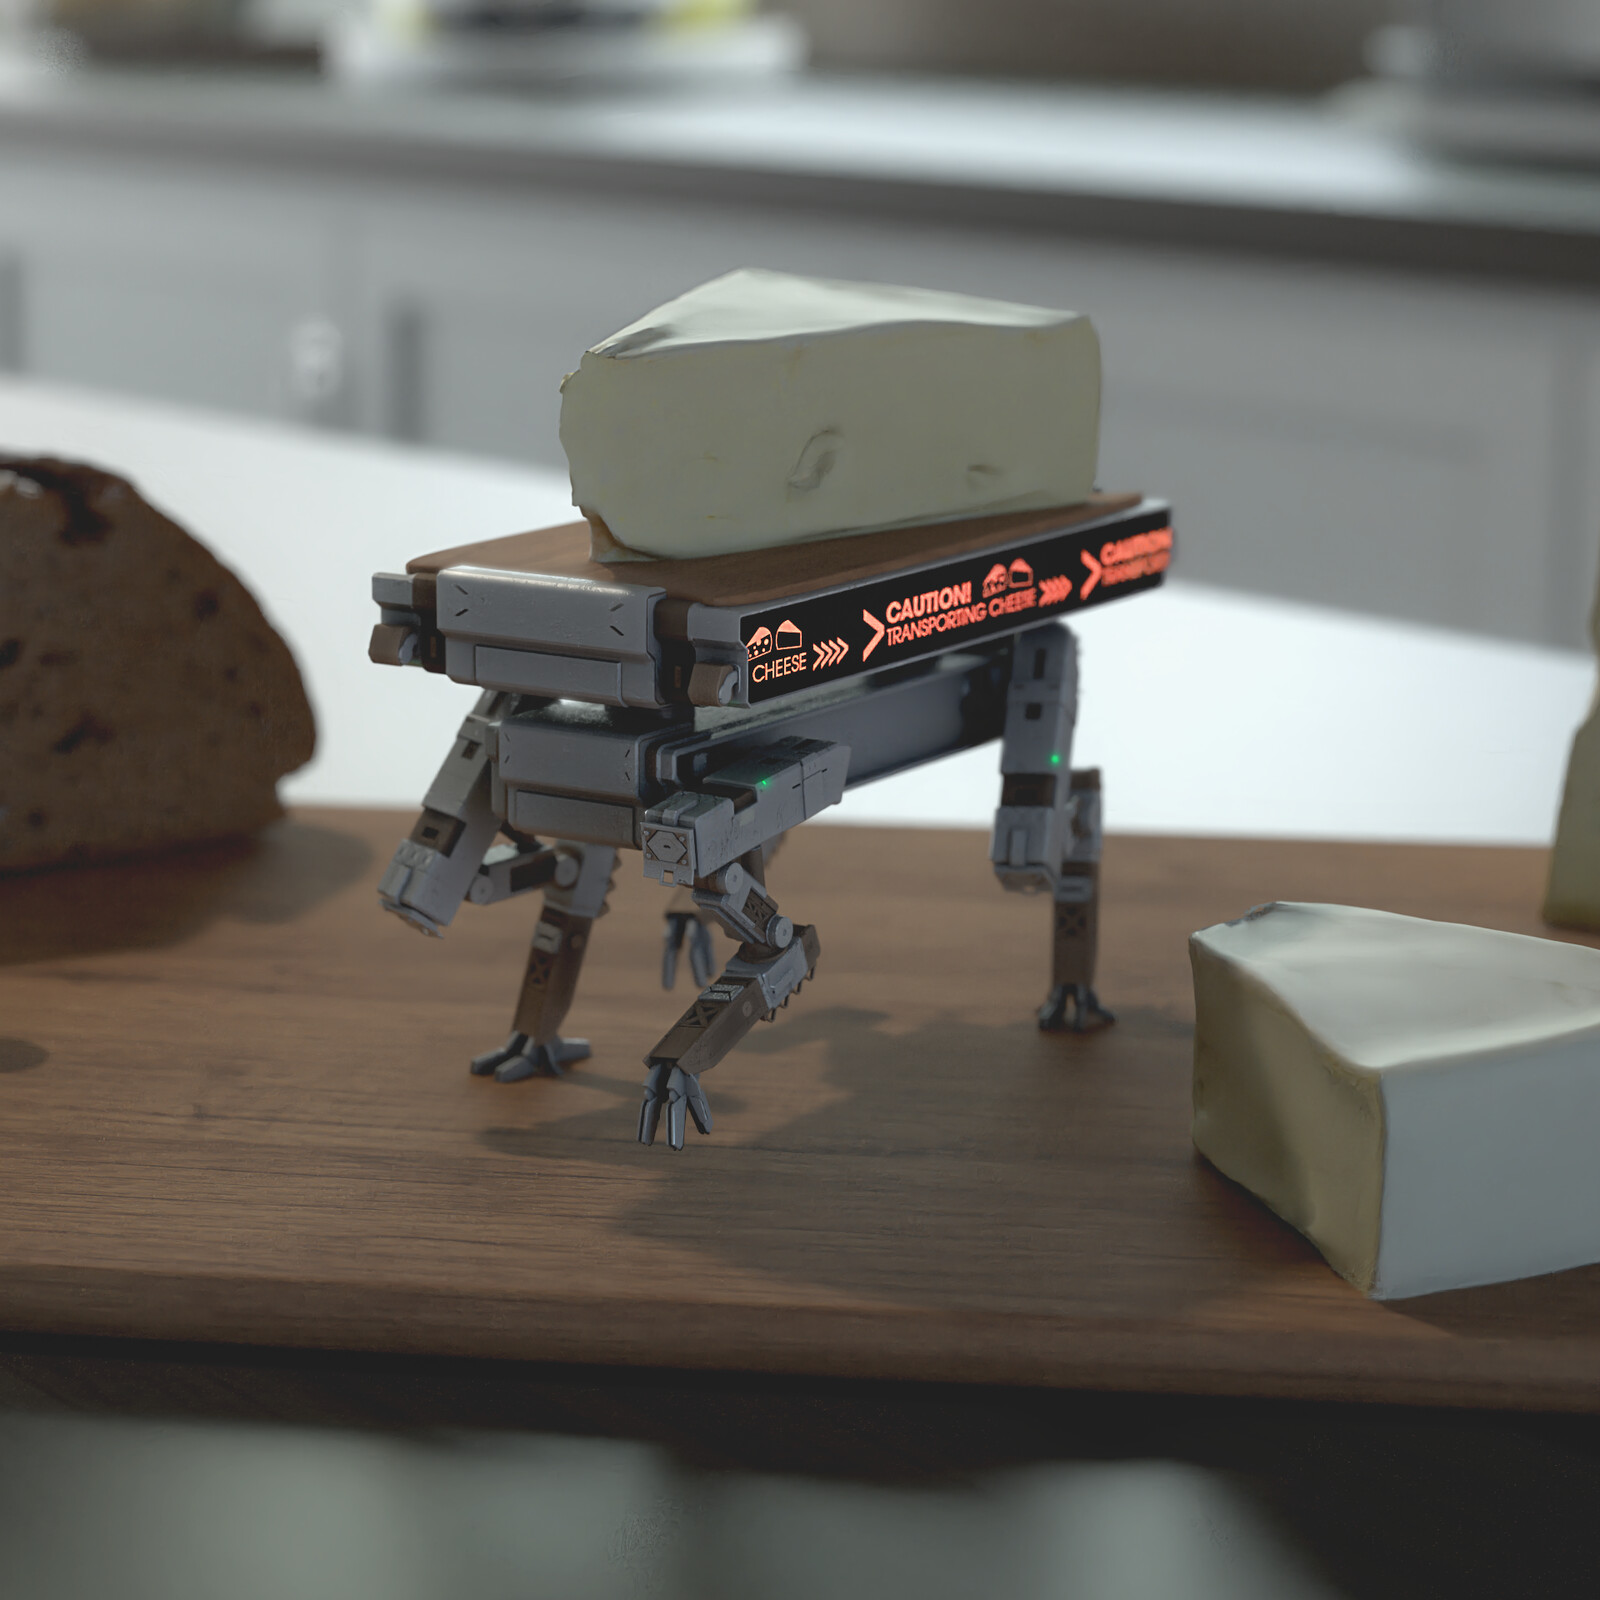 Brie-Bot